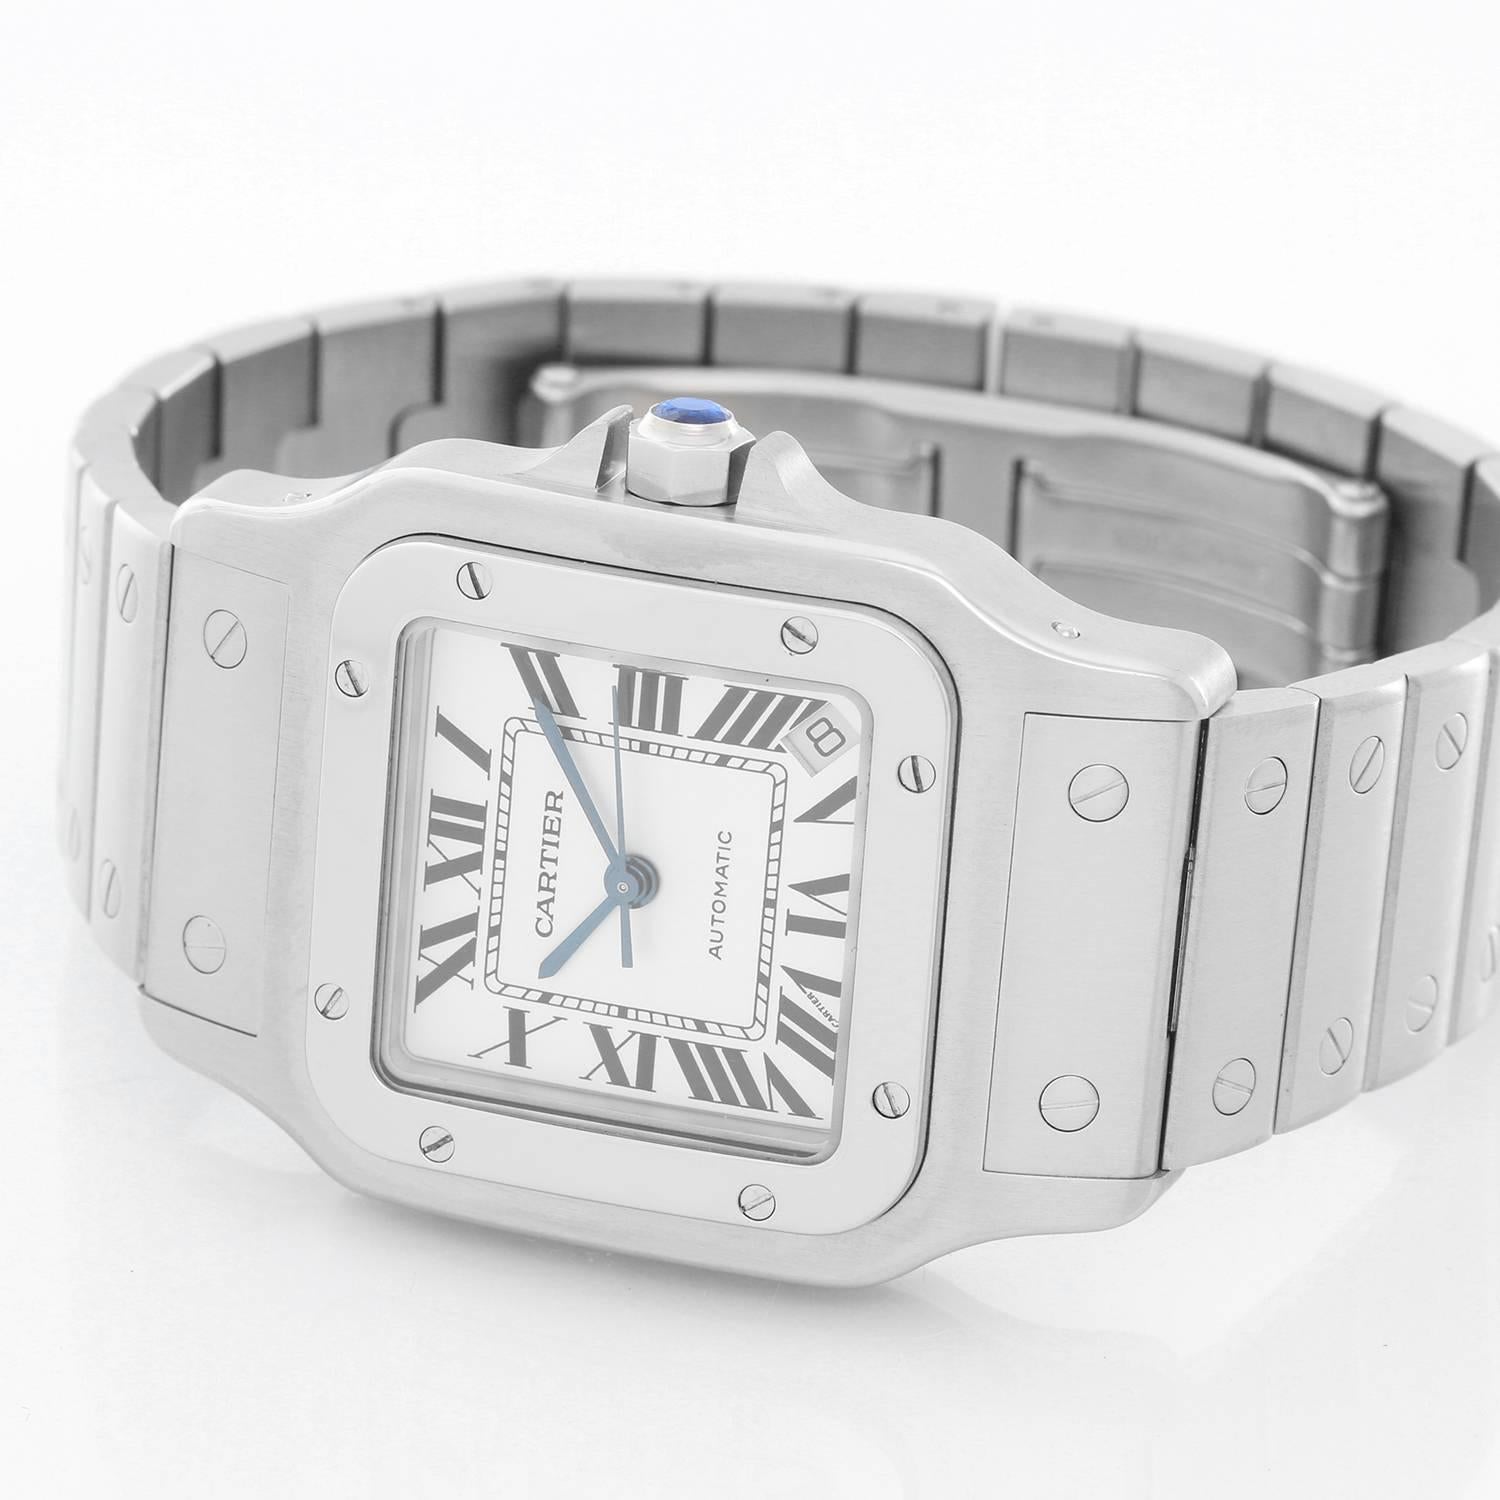 Cartier Santos Galbee XL Men's Stainless Steel Watch -  Automatic movement. Stainless steel  case (32mm). White dial with black Roman numerals, blued steel hands and date between 4 & 5 o'clock. Stainless steel Santos bracelet. Pre-owned with custom